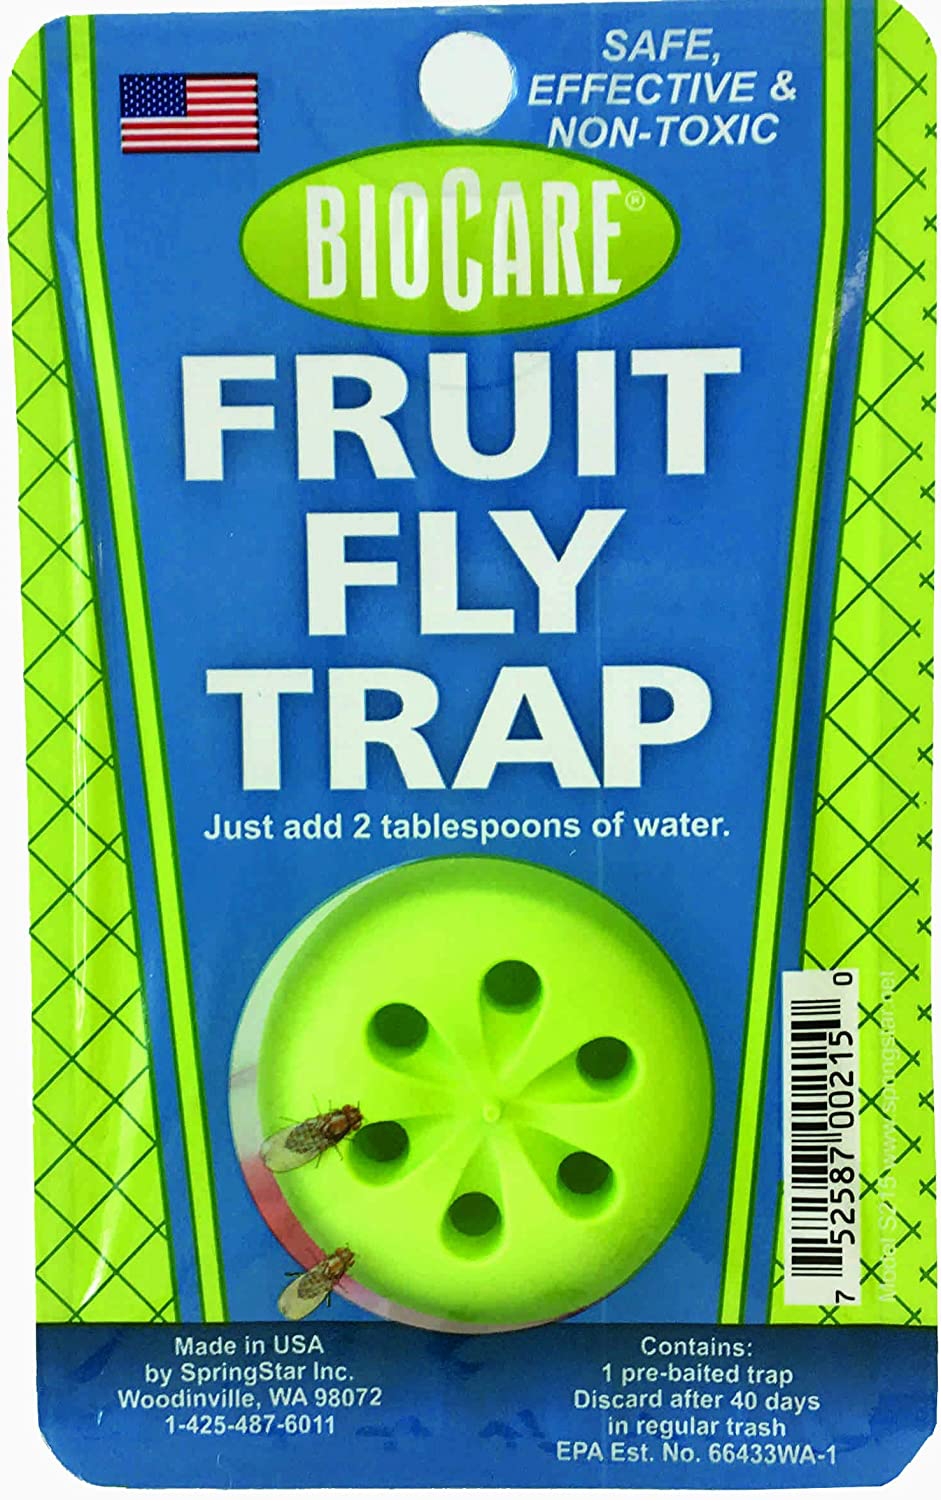 BioCare S215A Fruit Fly Trap, Green